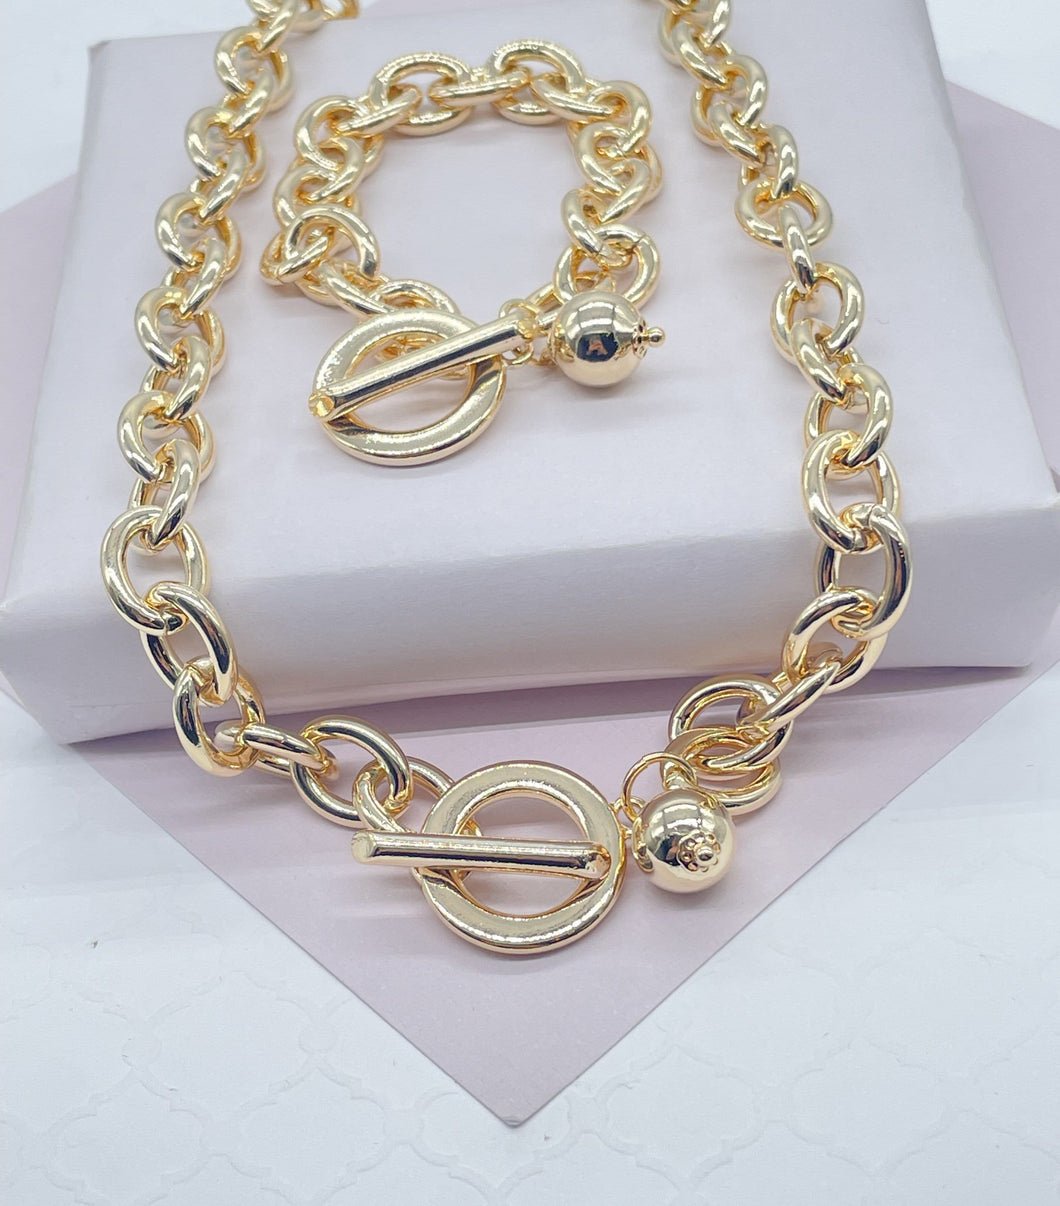 18k Gold Filled Oval Link Necklace And Bracelet Set Featuring Toggle Closure And Hanging Ball